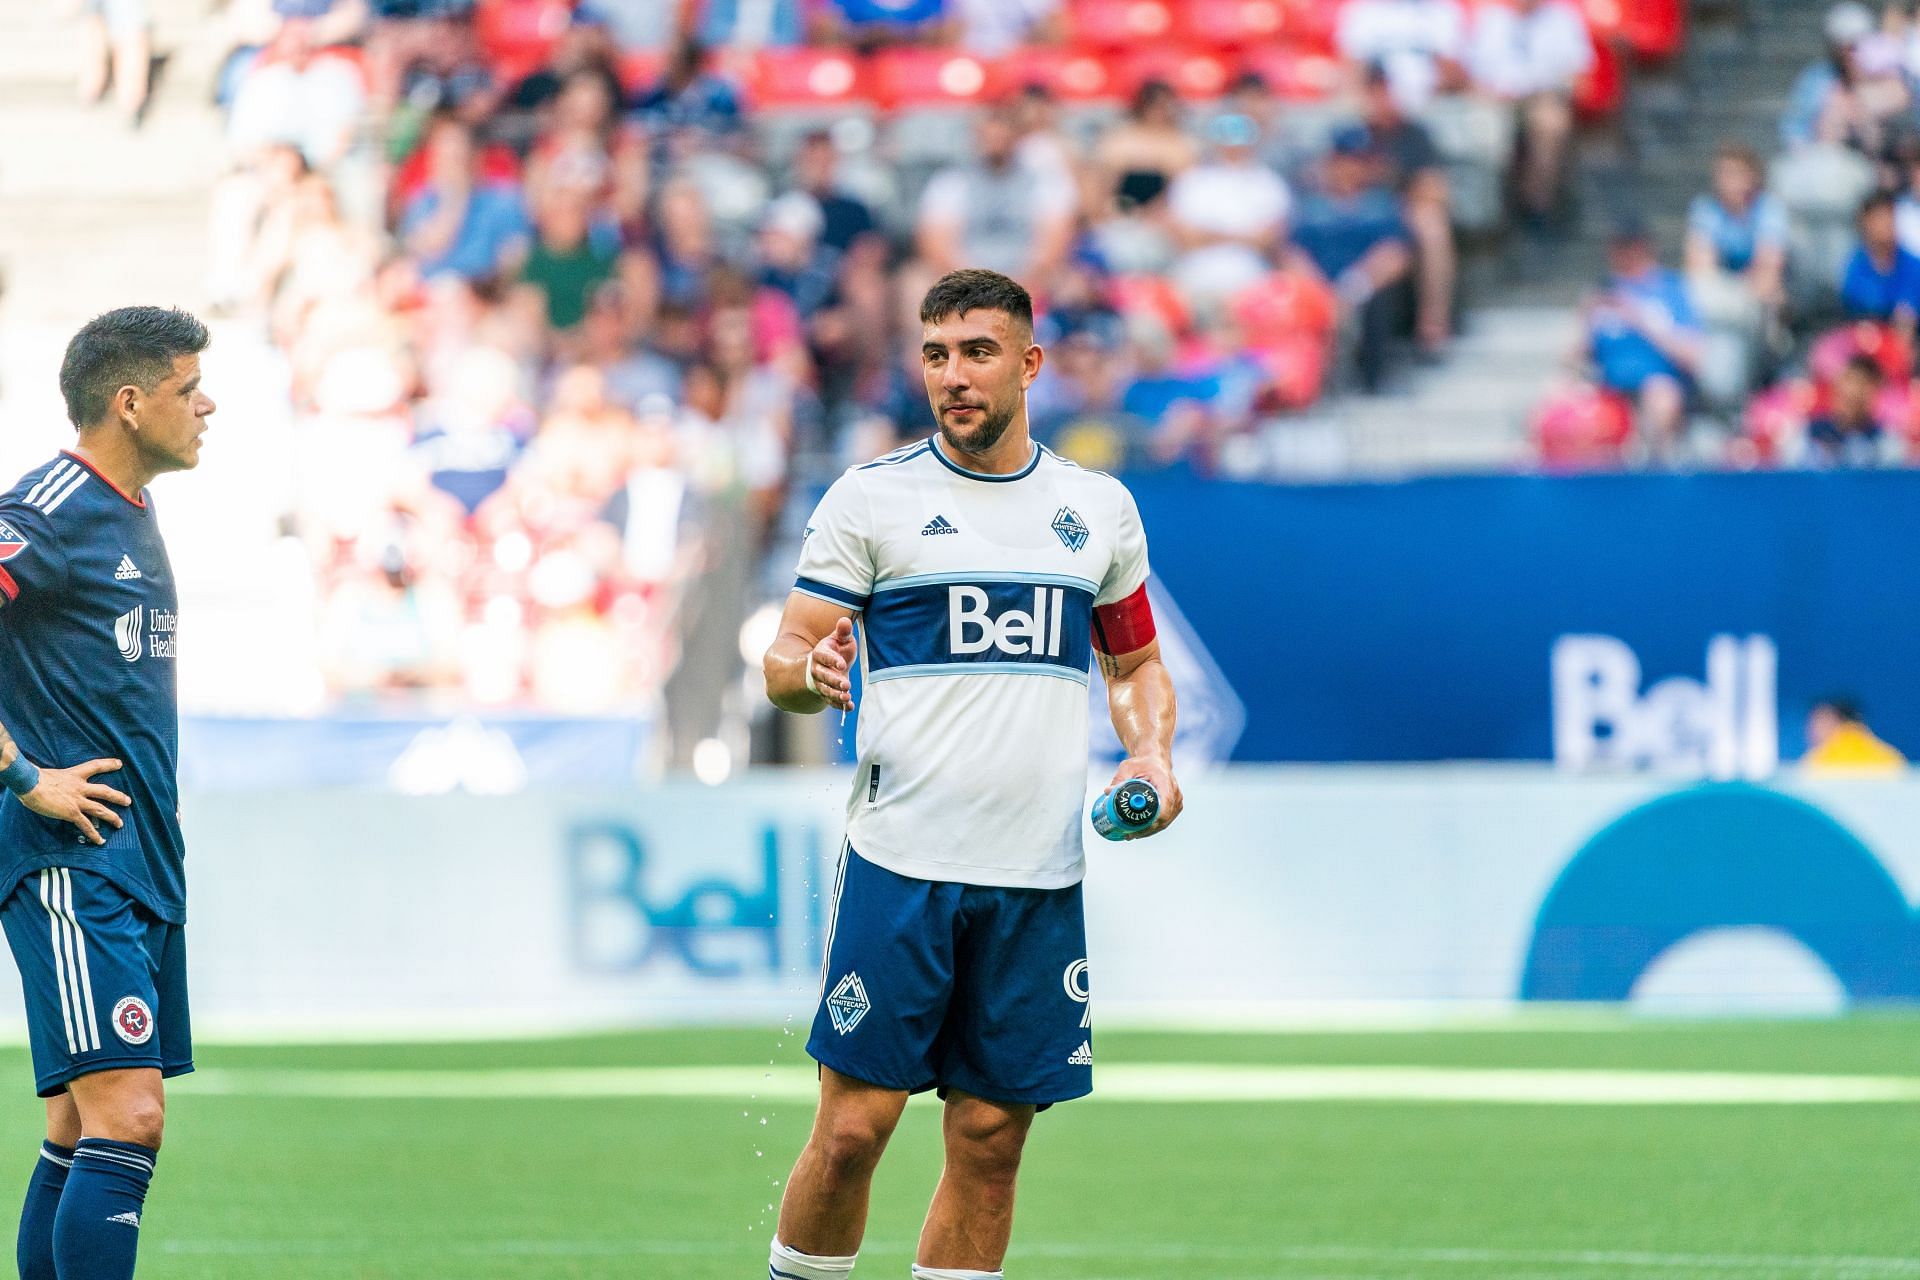 Vancouver Whitecaps have a point to prove